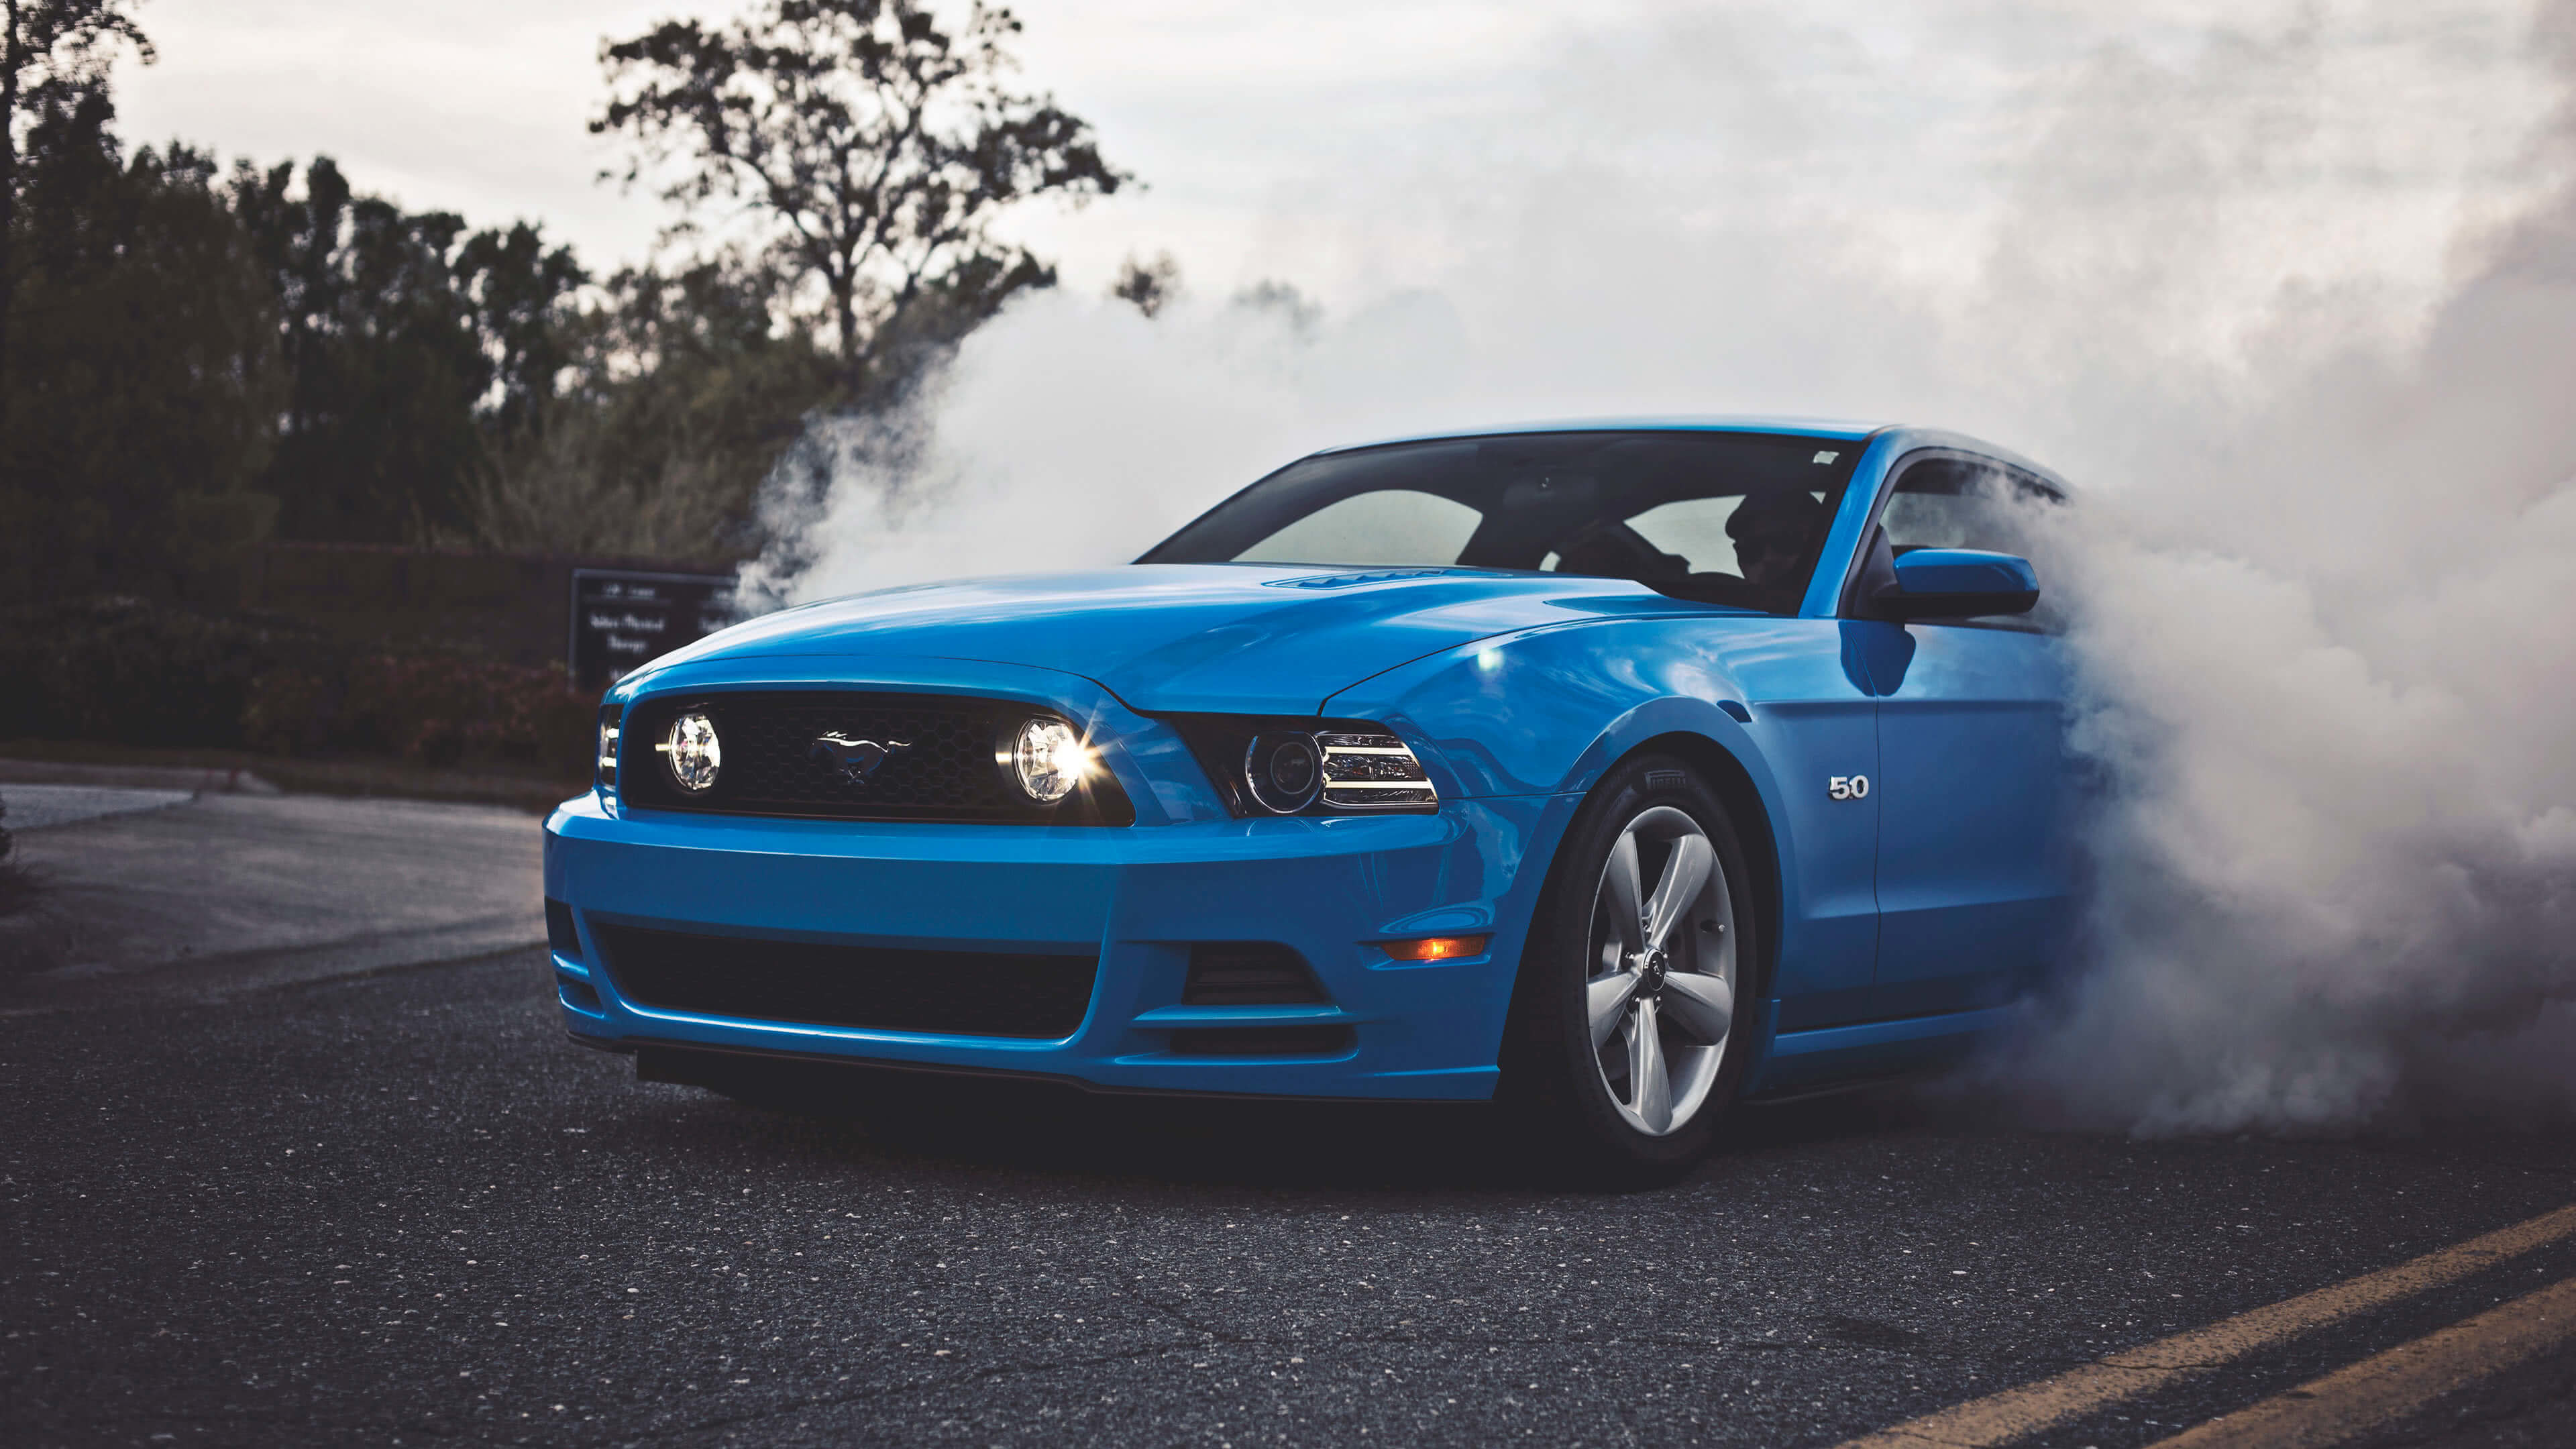 3840x2160 Blue Ford Shelby Mustang Uhd 4k Wallpaper Mustang Wallpaper 4k 3840x2160 Wallpaper Teahub Io